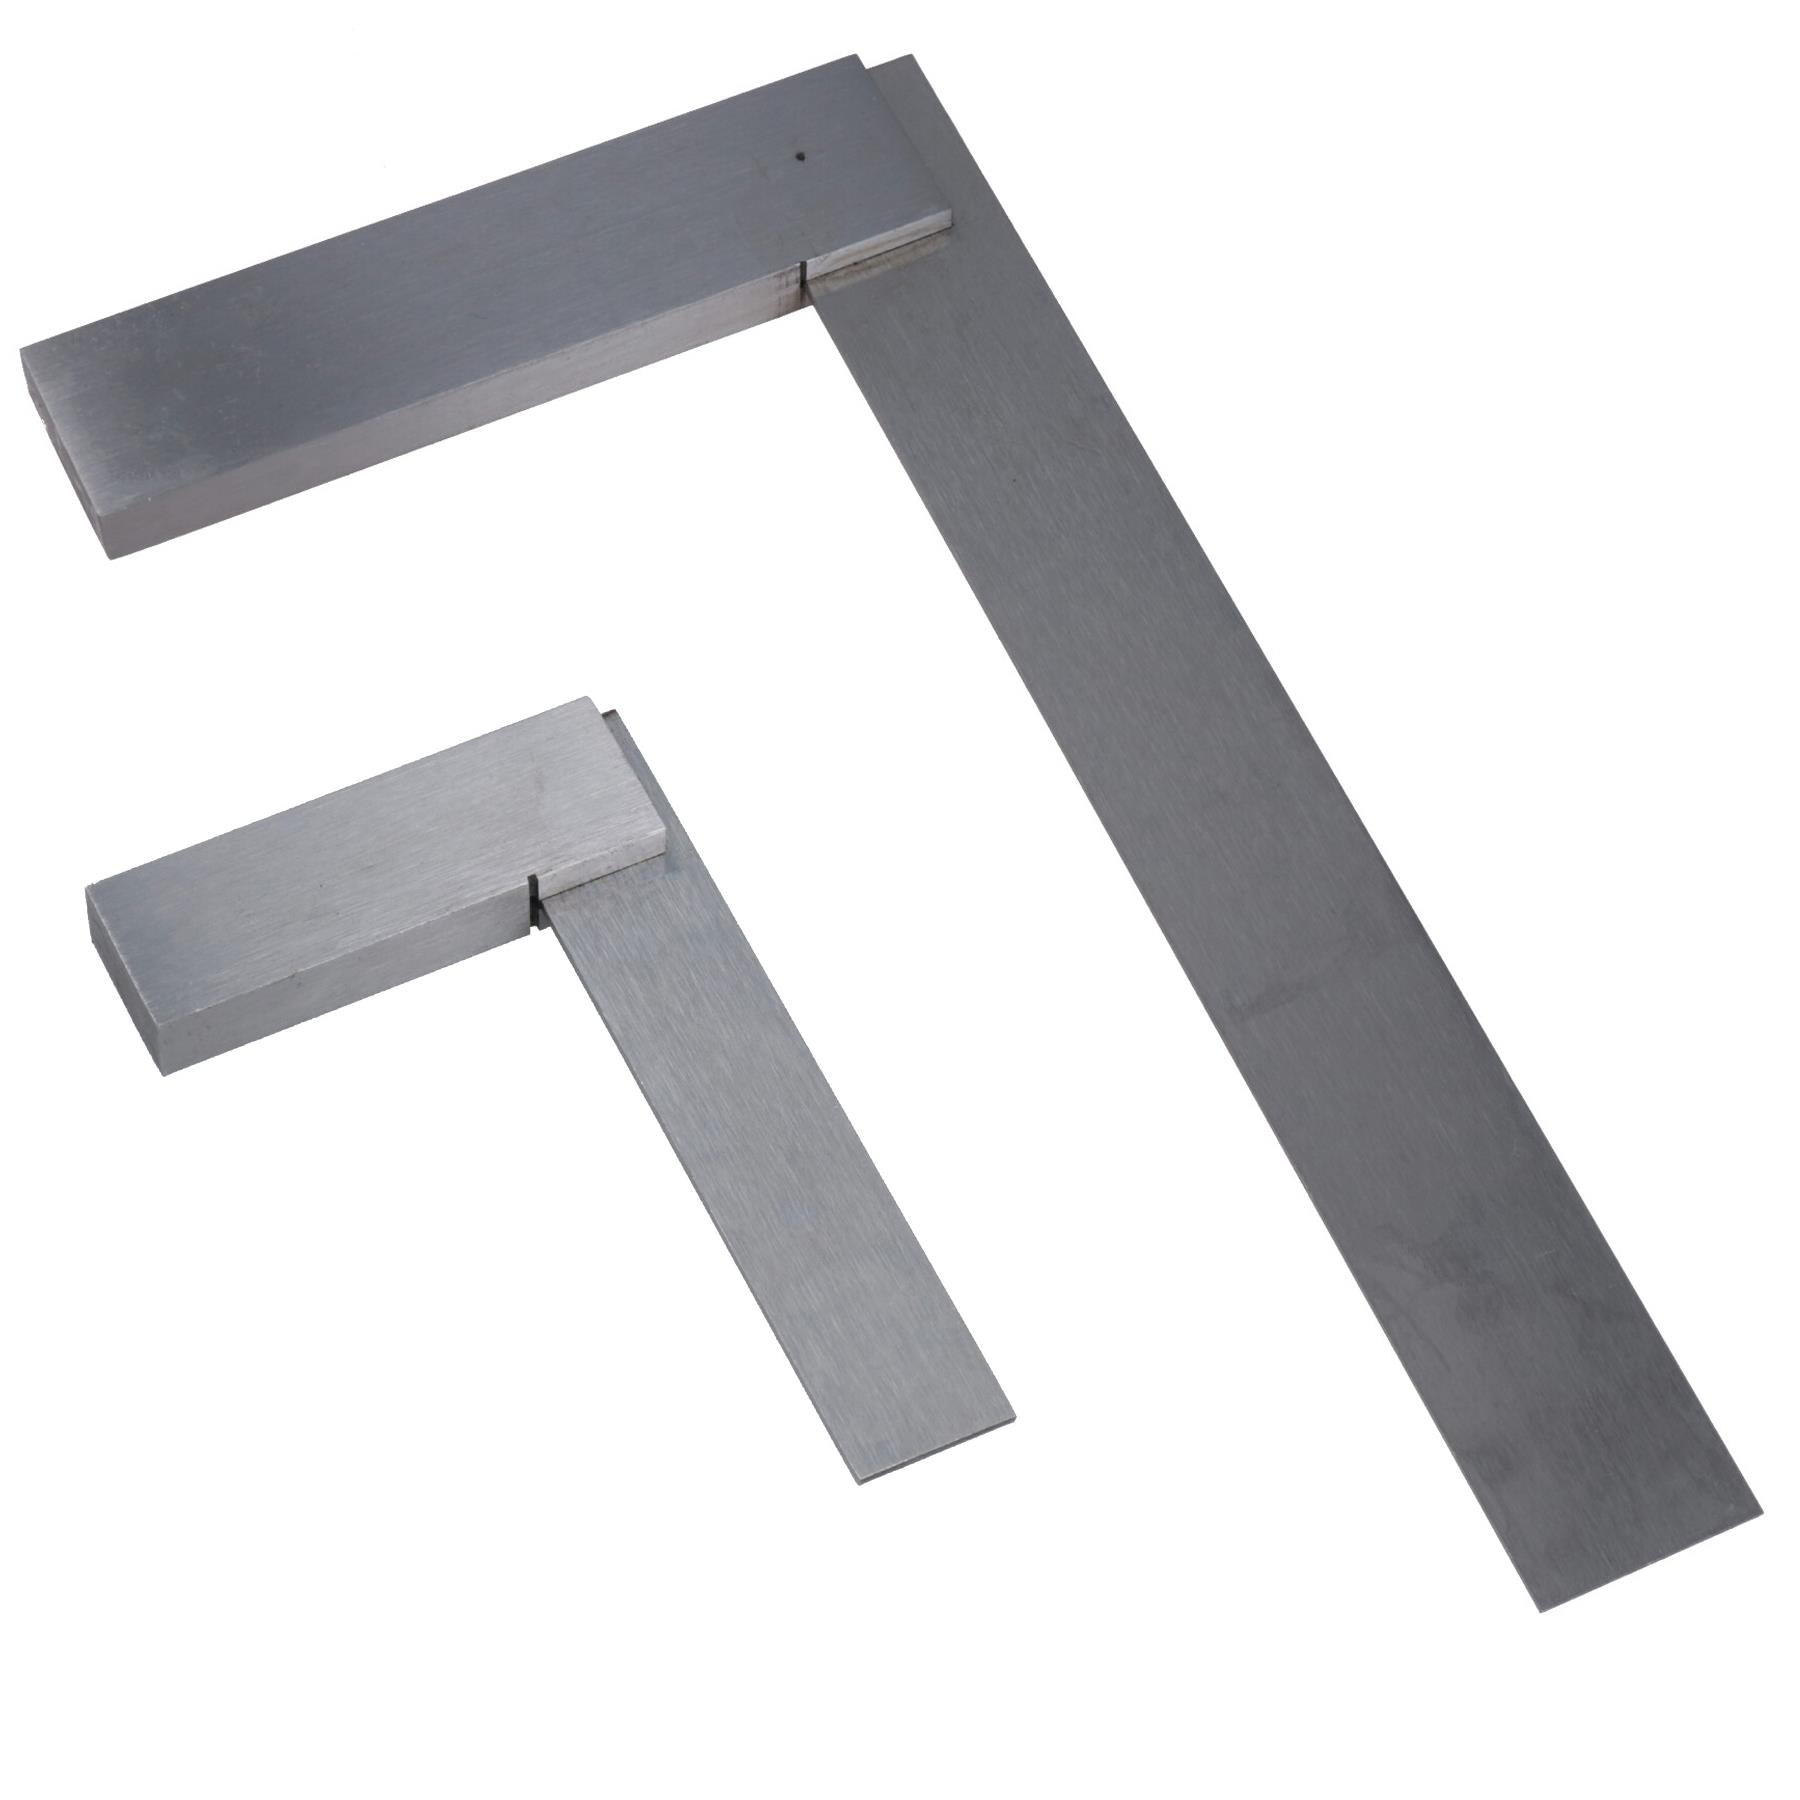 3 + 12 Inch 75 / 300mm Engineer Tri Set Square Right Angle Straight Edge Stainless